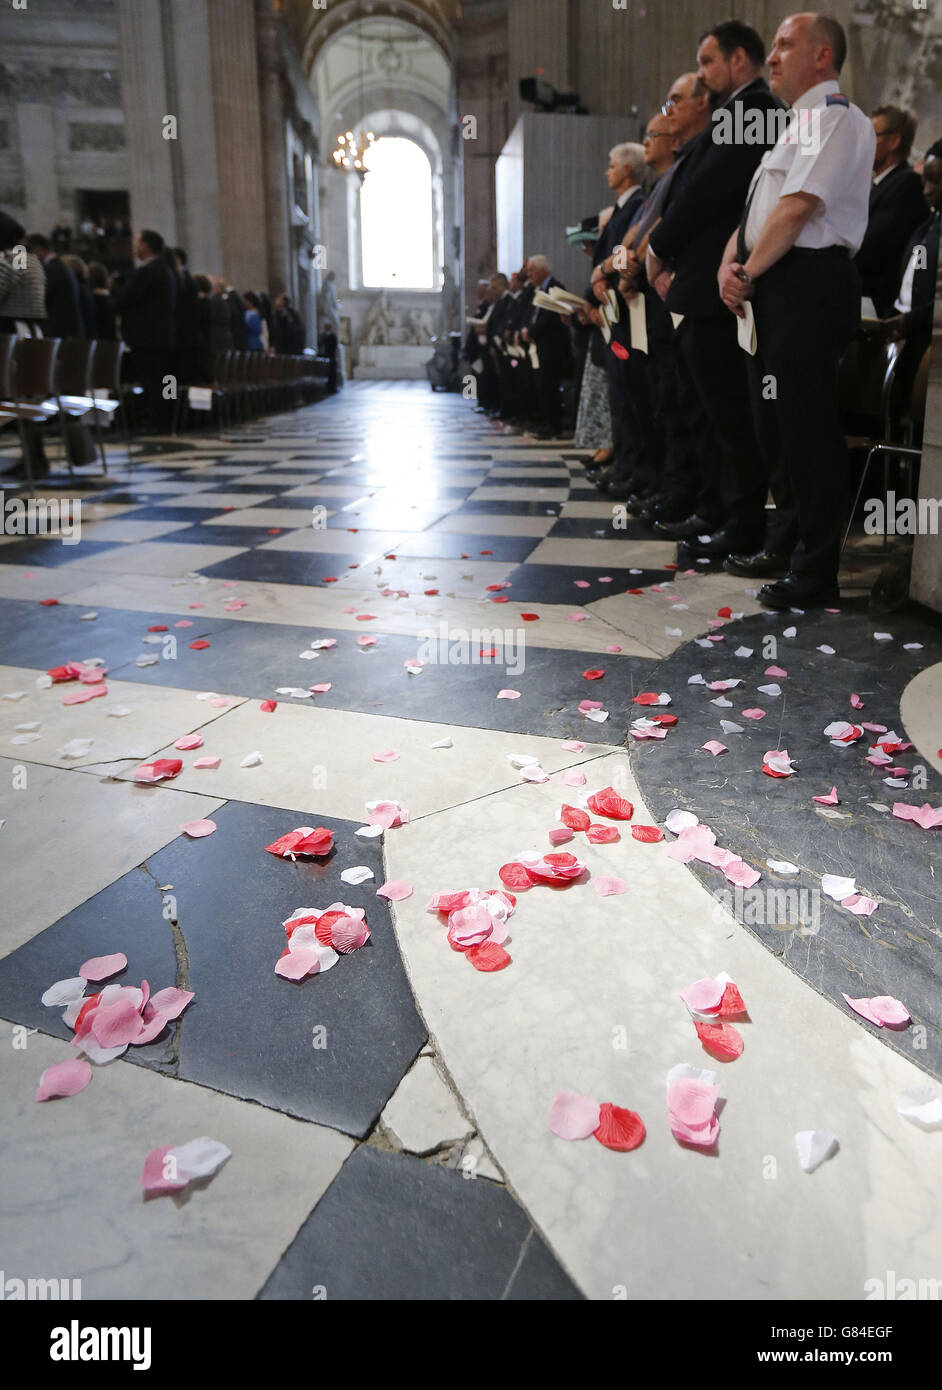 Poppy petals are symbolically scattered on the floor during a service in St Paul's Cathedral, to commemorate the tenth anniversary of the London Bombings in London. Stock Photo